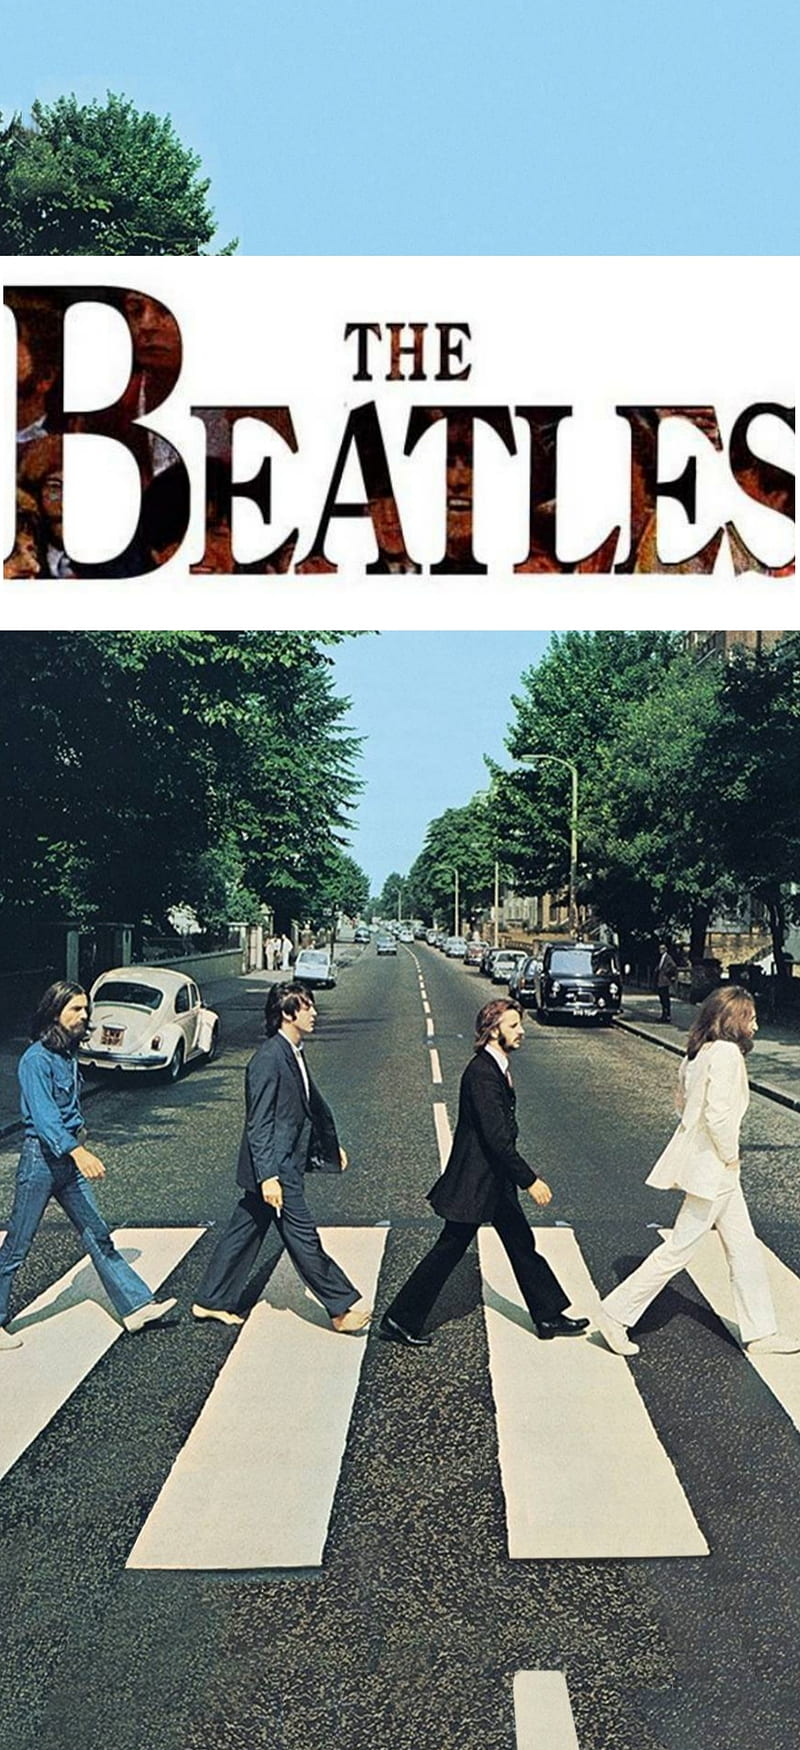 Quick little edit I made for an iPhone wallpaper  rbeatles